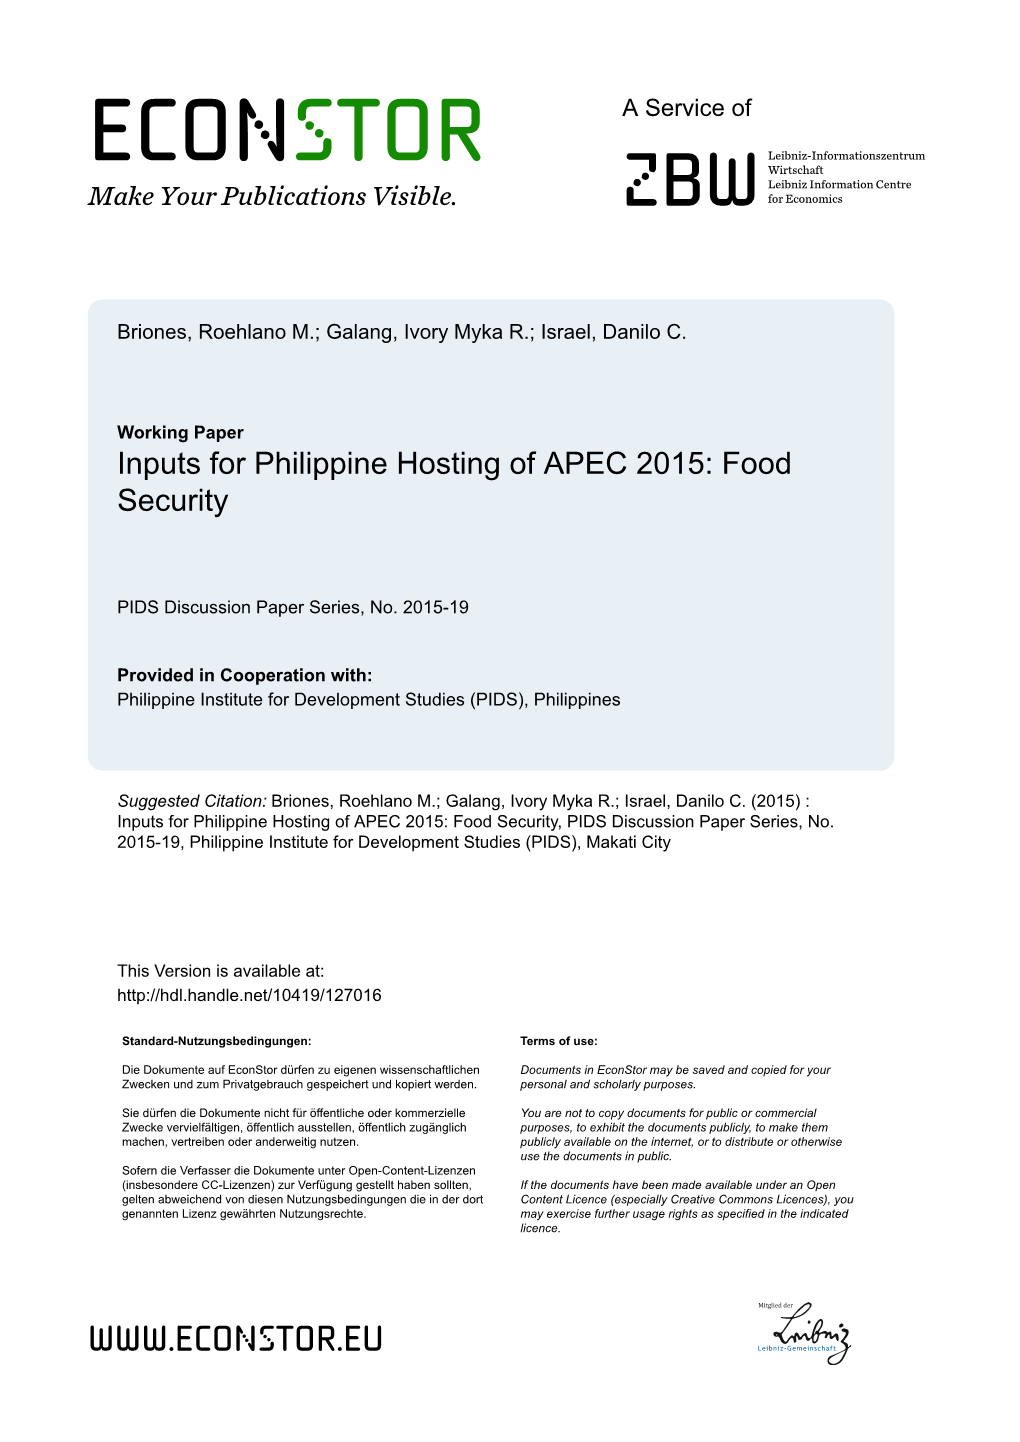 Inputs for Philippine Hosting of APEC 2015: Food Security